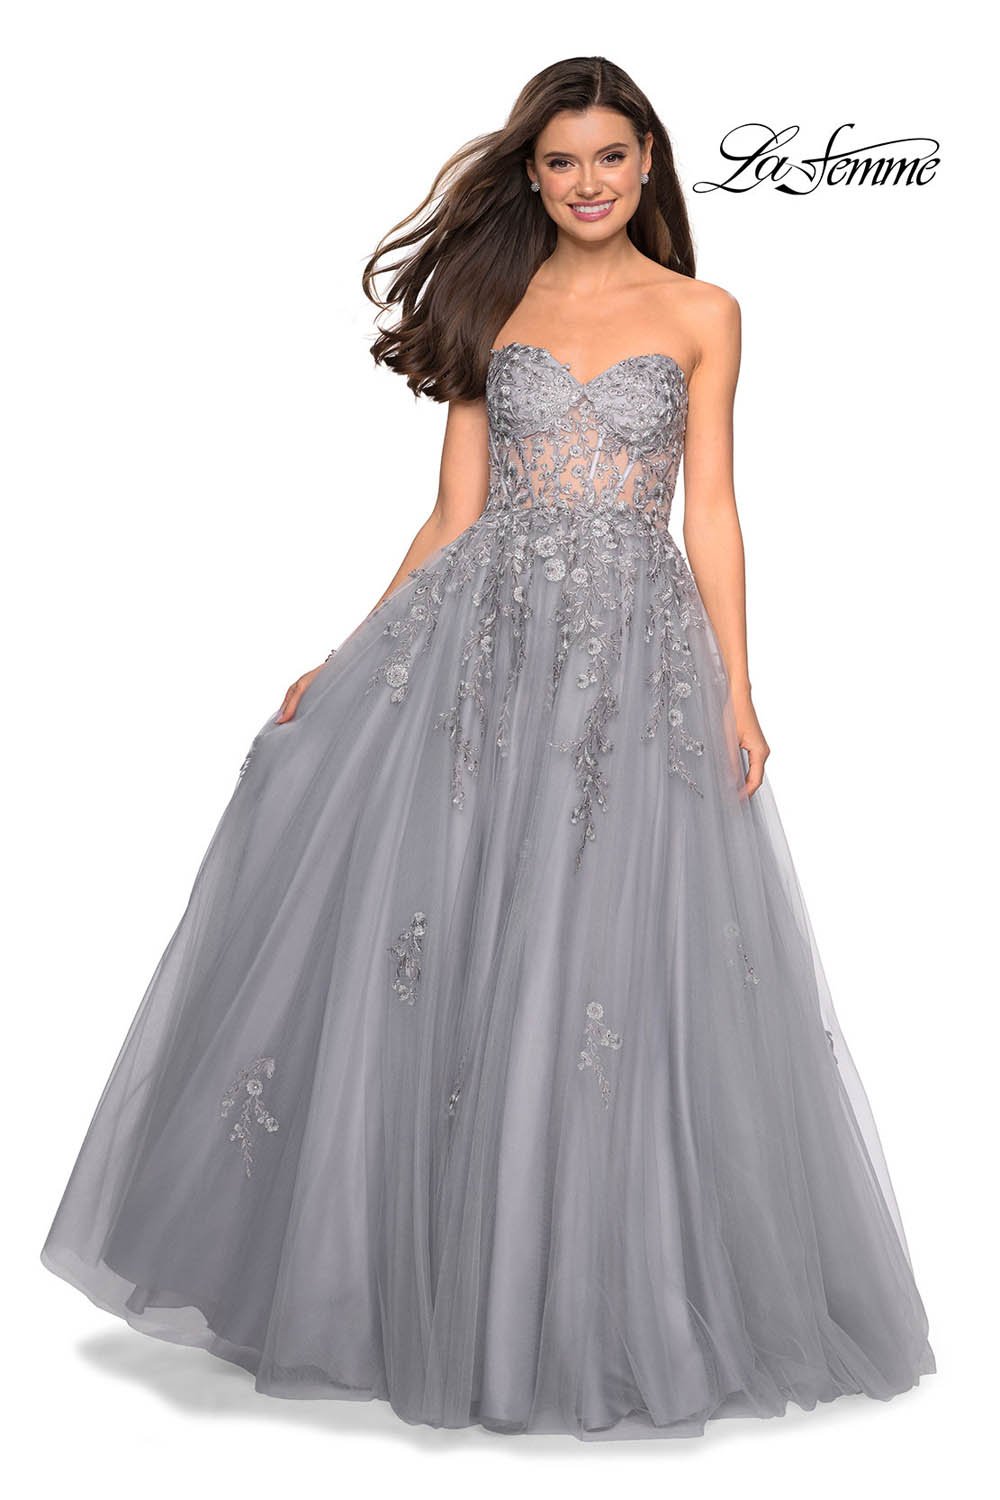 Gigi by La Femme 27592 dress images in these colors: Champagne, Silver.